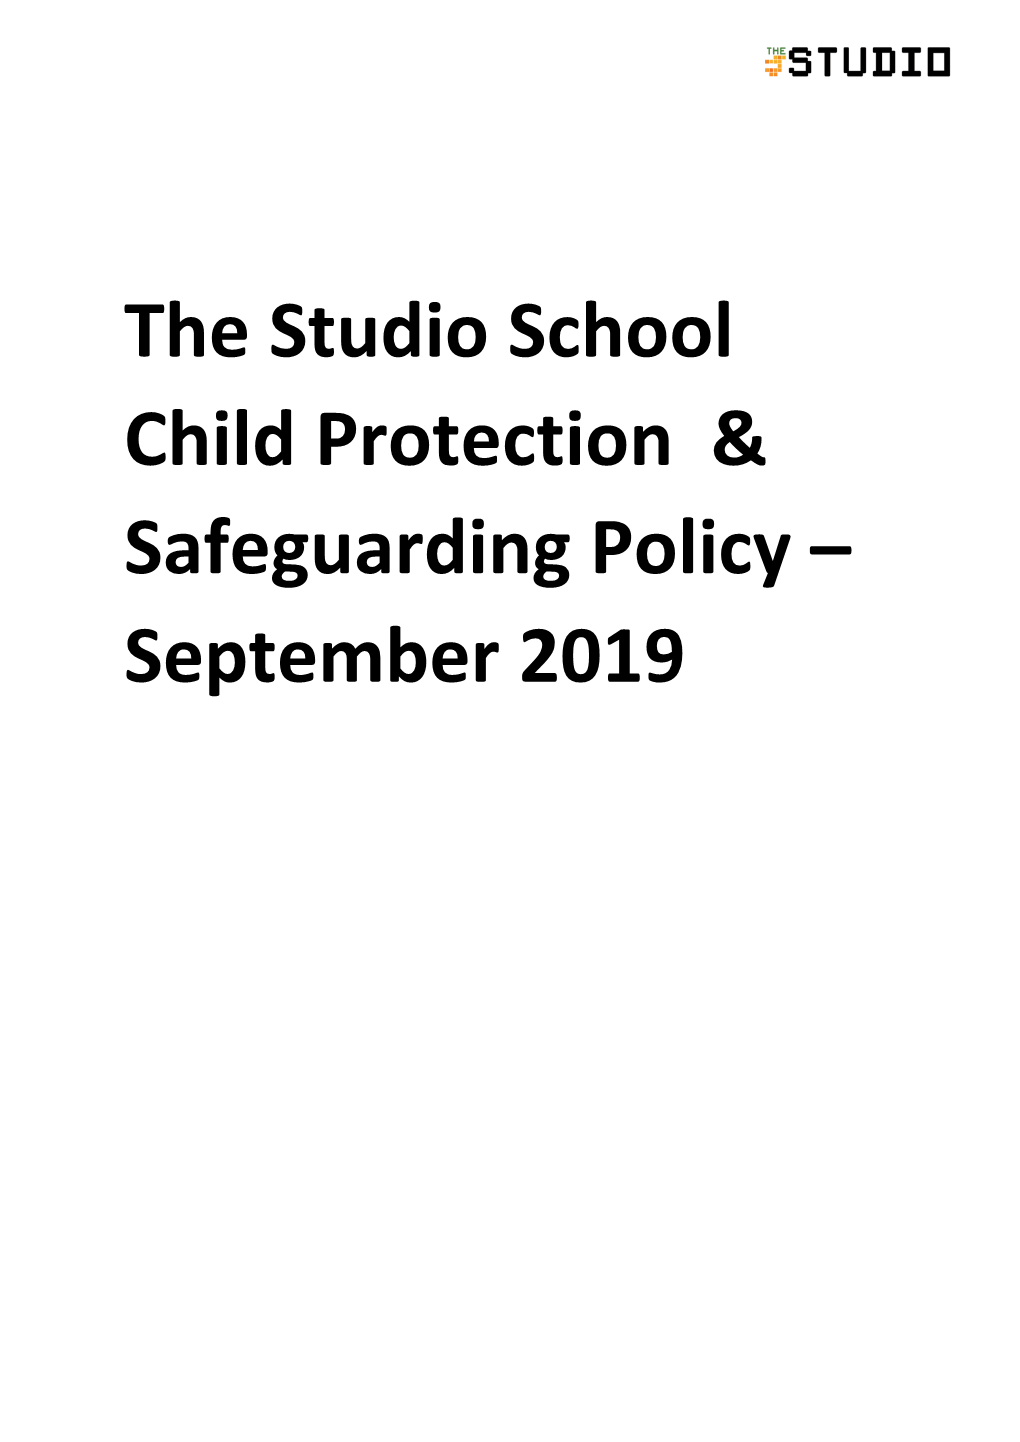 The Studio School Child Protection & Safeguarding Policy – September 2019